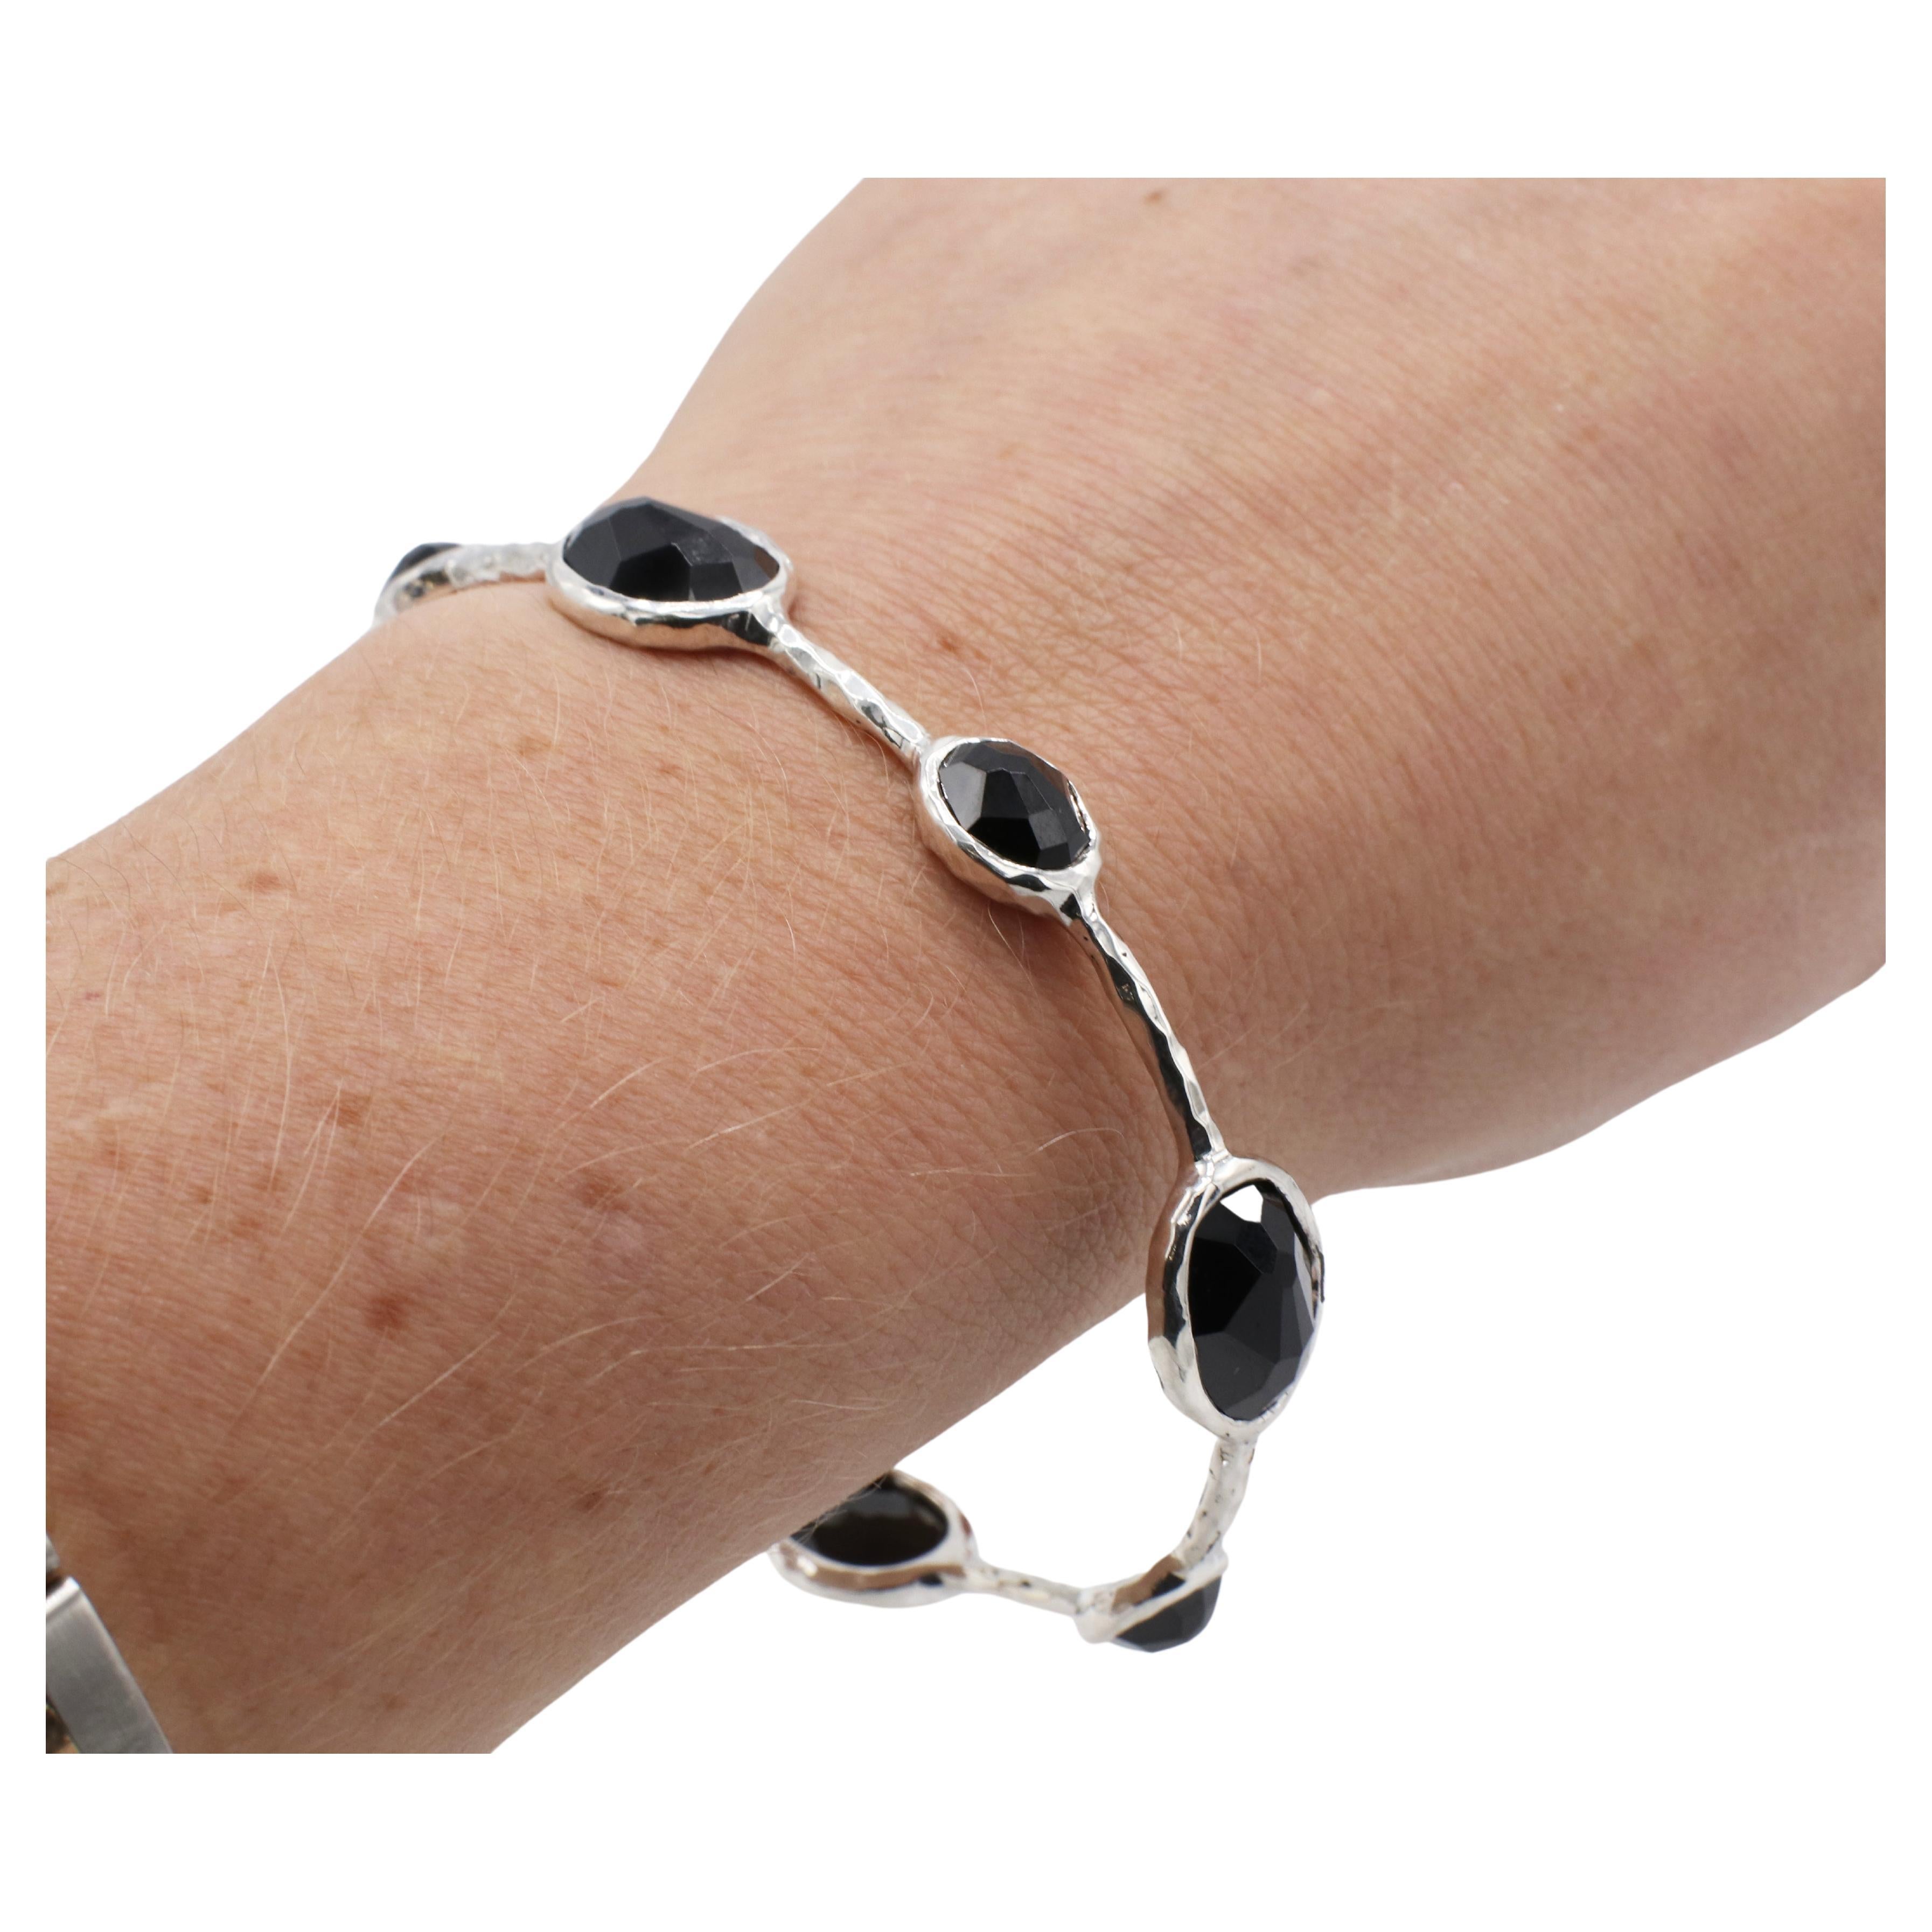 Ippolita Sterling Silver Rock Candy Black Onyx Faceted Bangle Bracelet 
Metal: Sterling silver 925
Weight: 15.6 grams
Circumference: 6.5 inches
Width: 2 - 11mm
Signed: Ippolita 925

